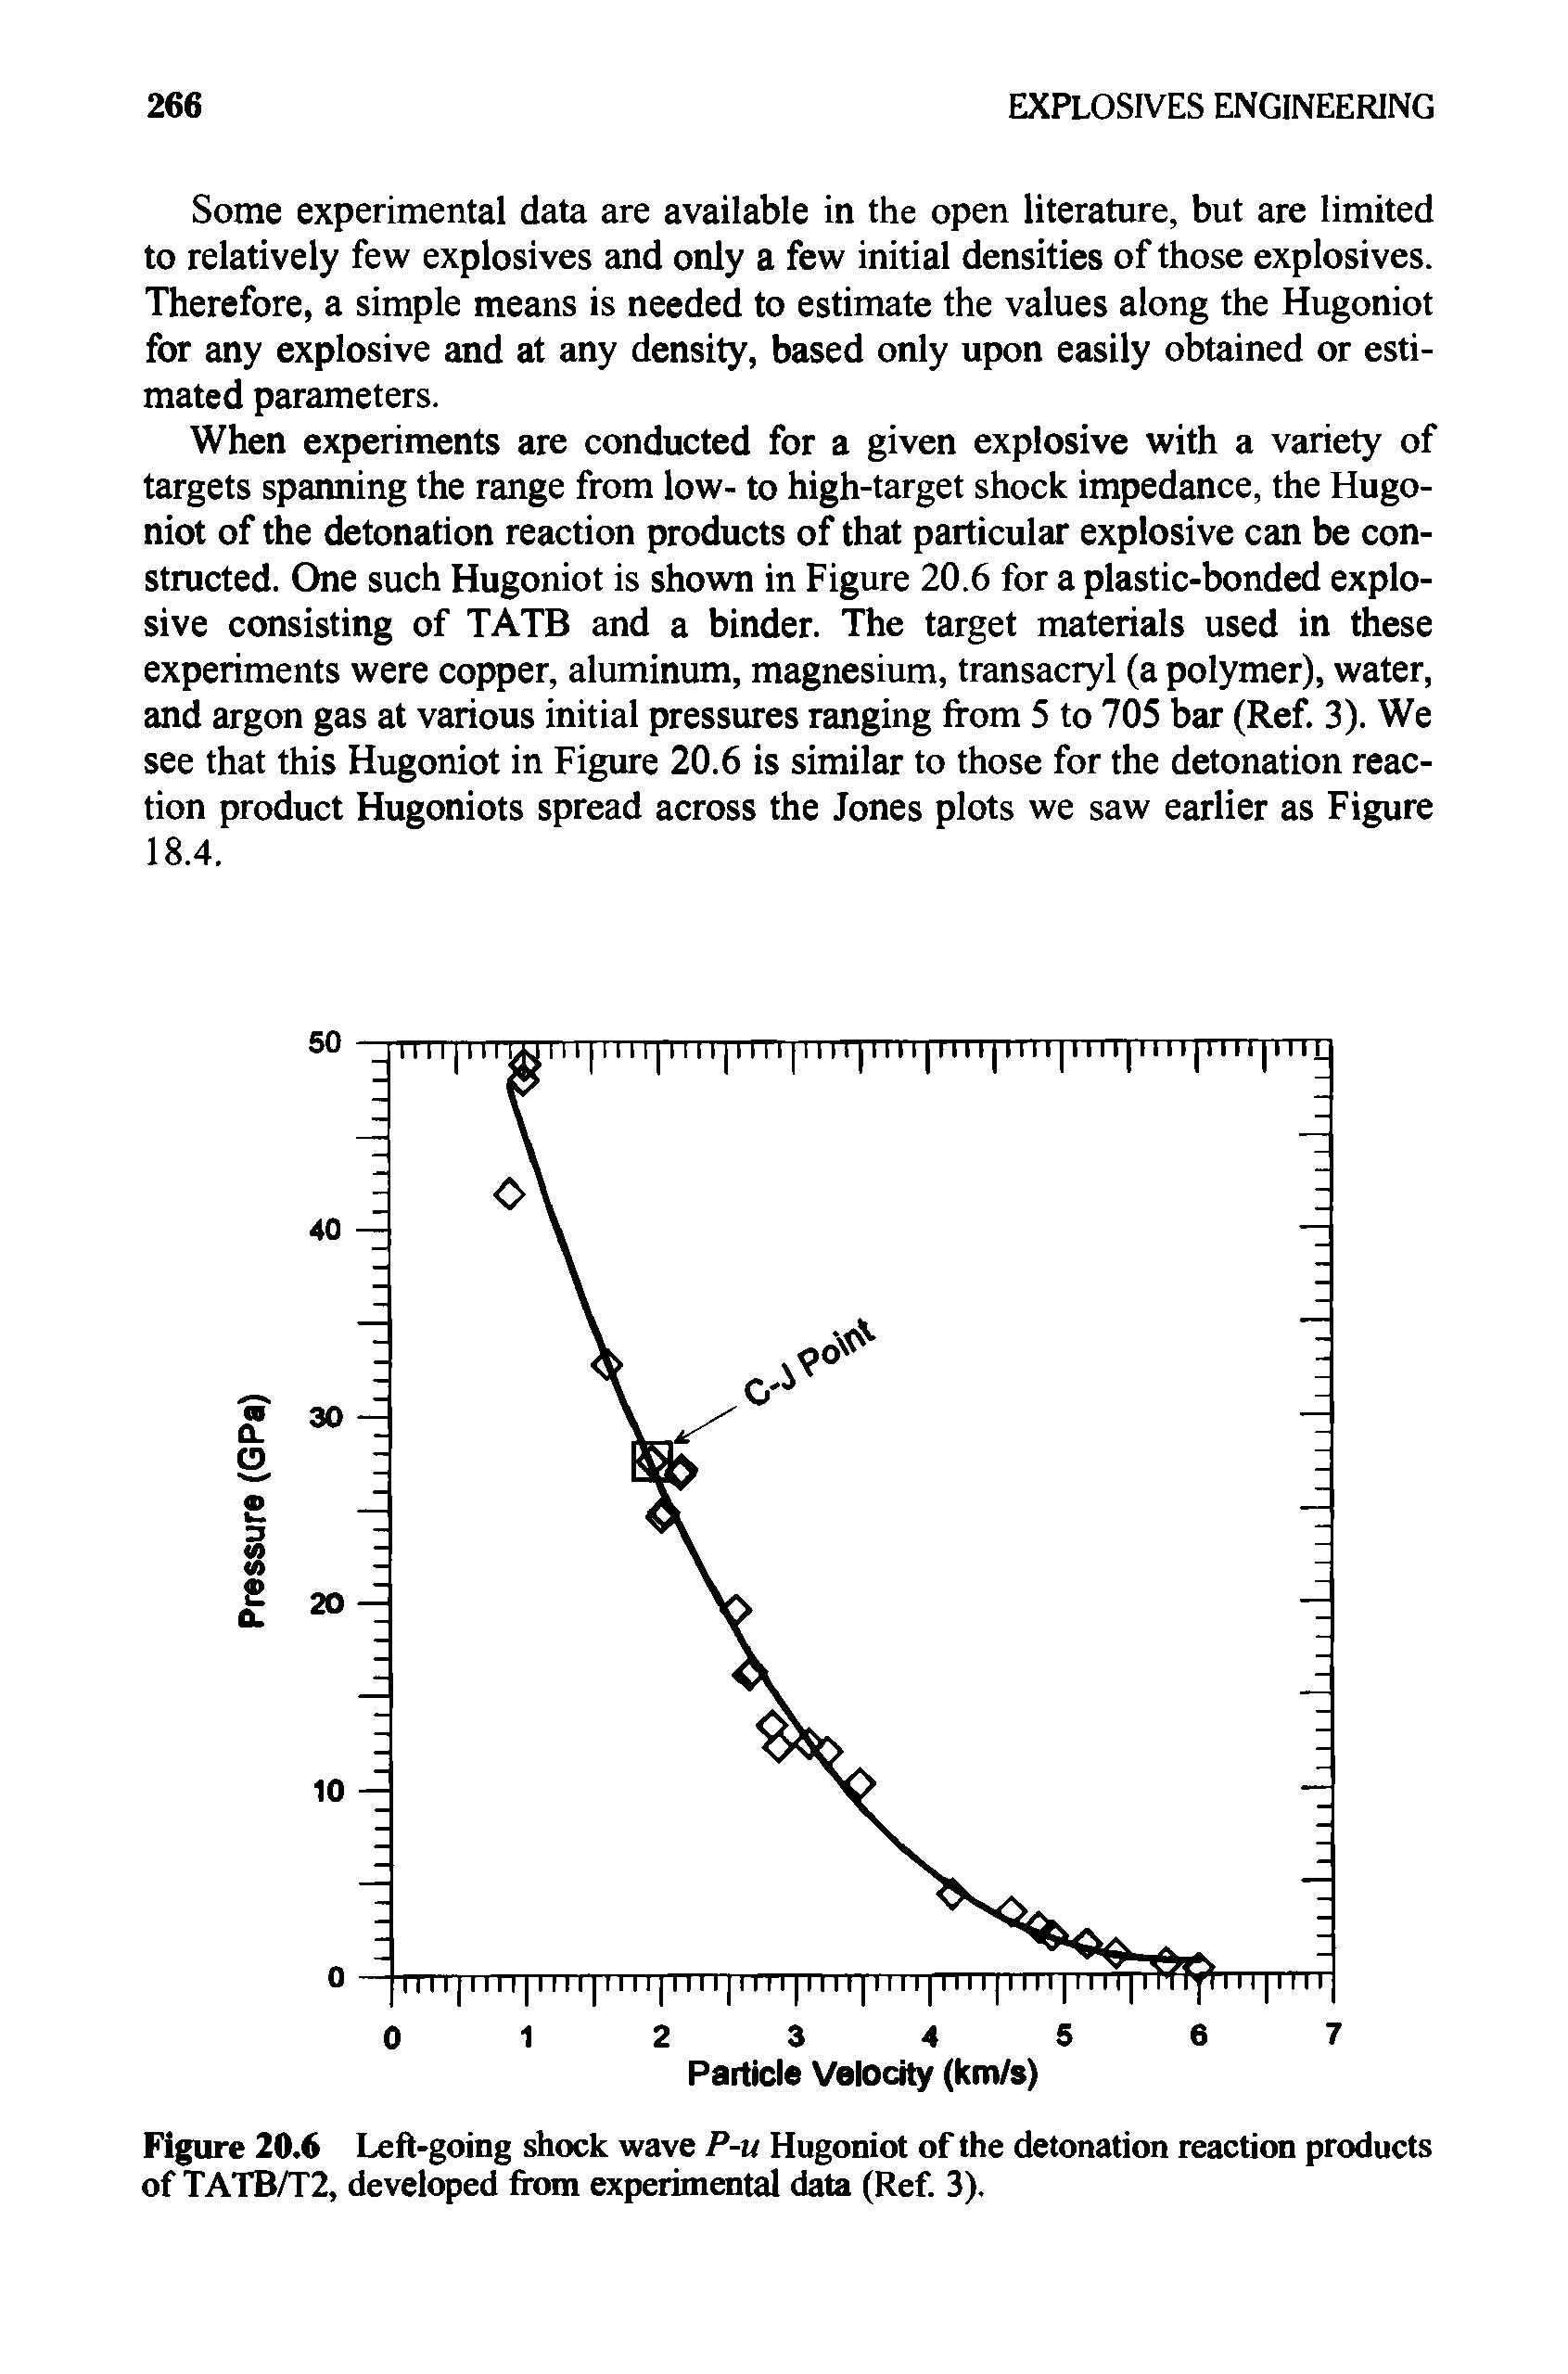 Figure 20.6 Left-going shock wave P-u Hugoniot of the detonation reaction products of TATB/T2, developed from experimental data (Ref. 3).